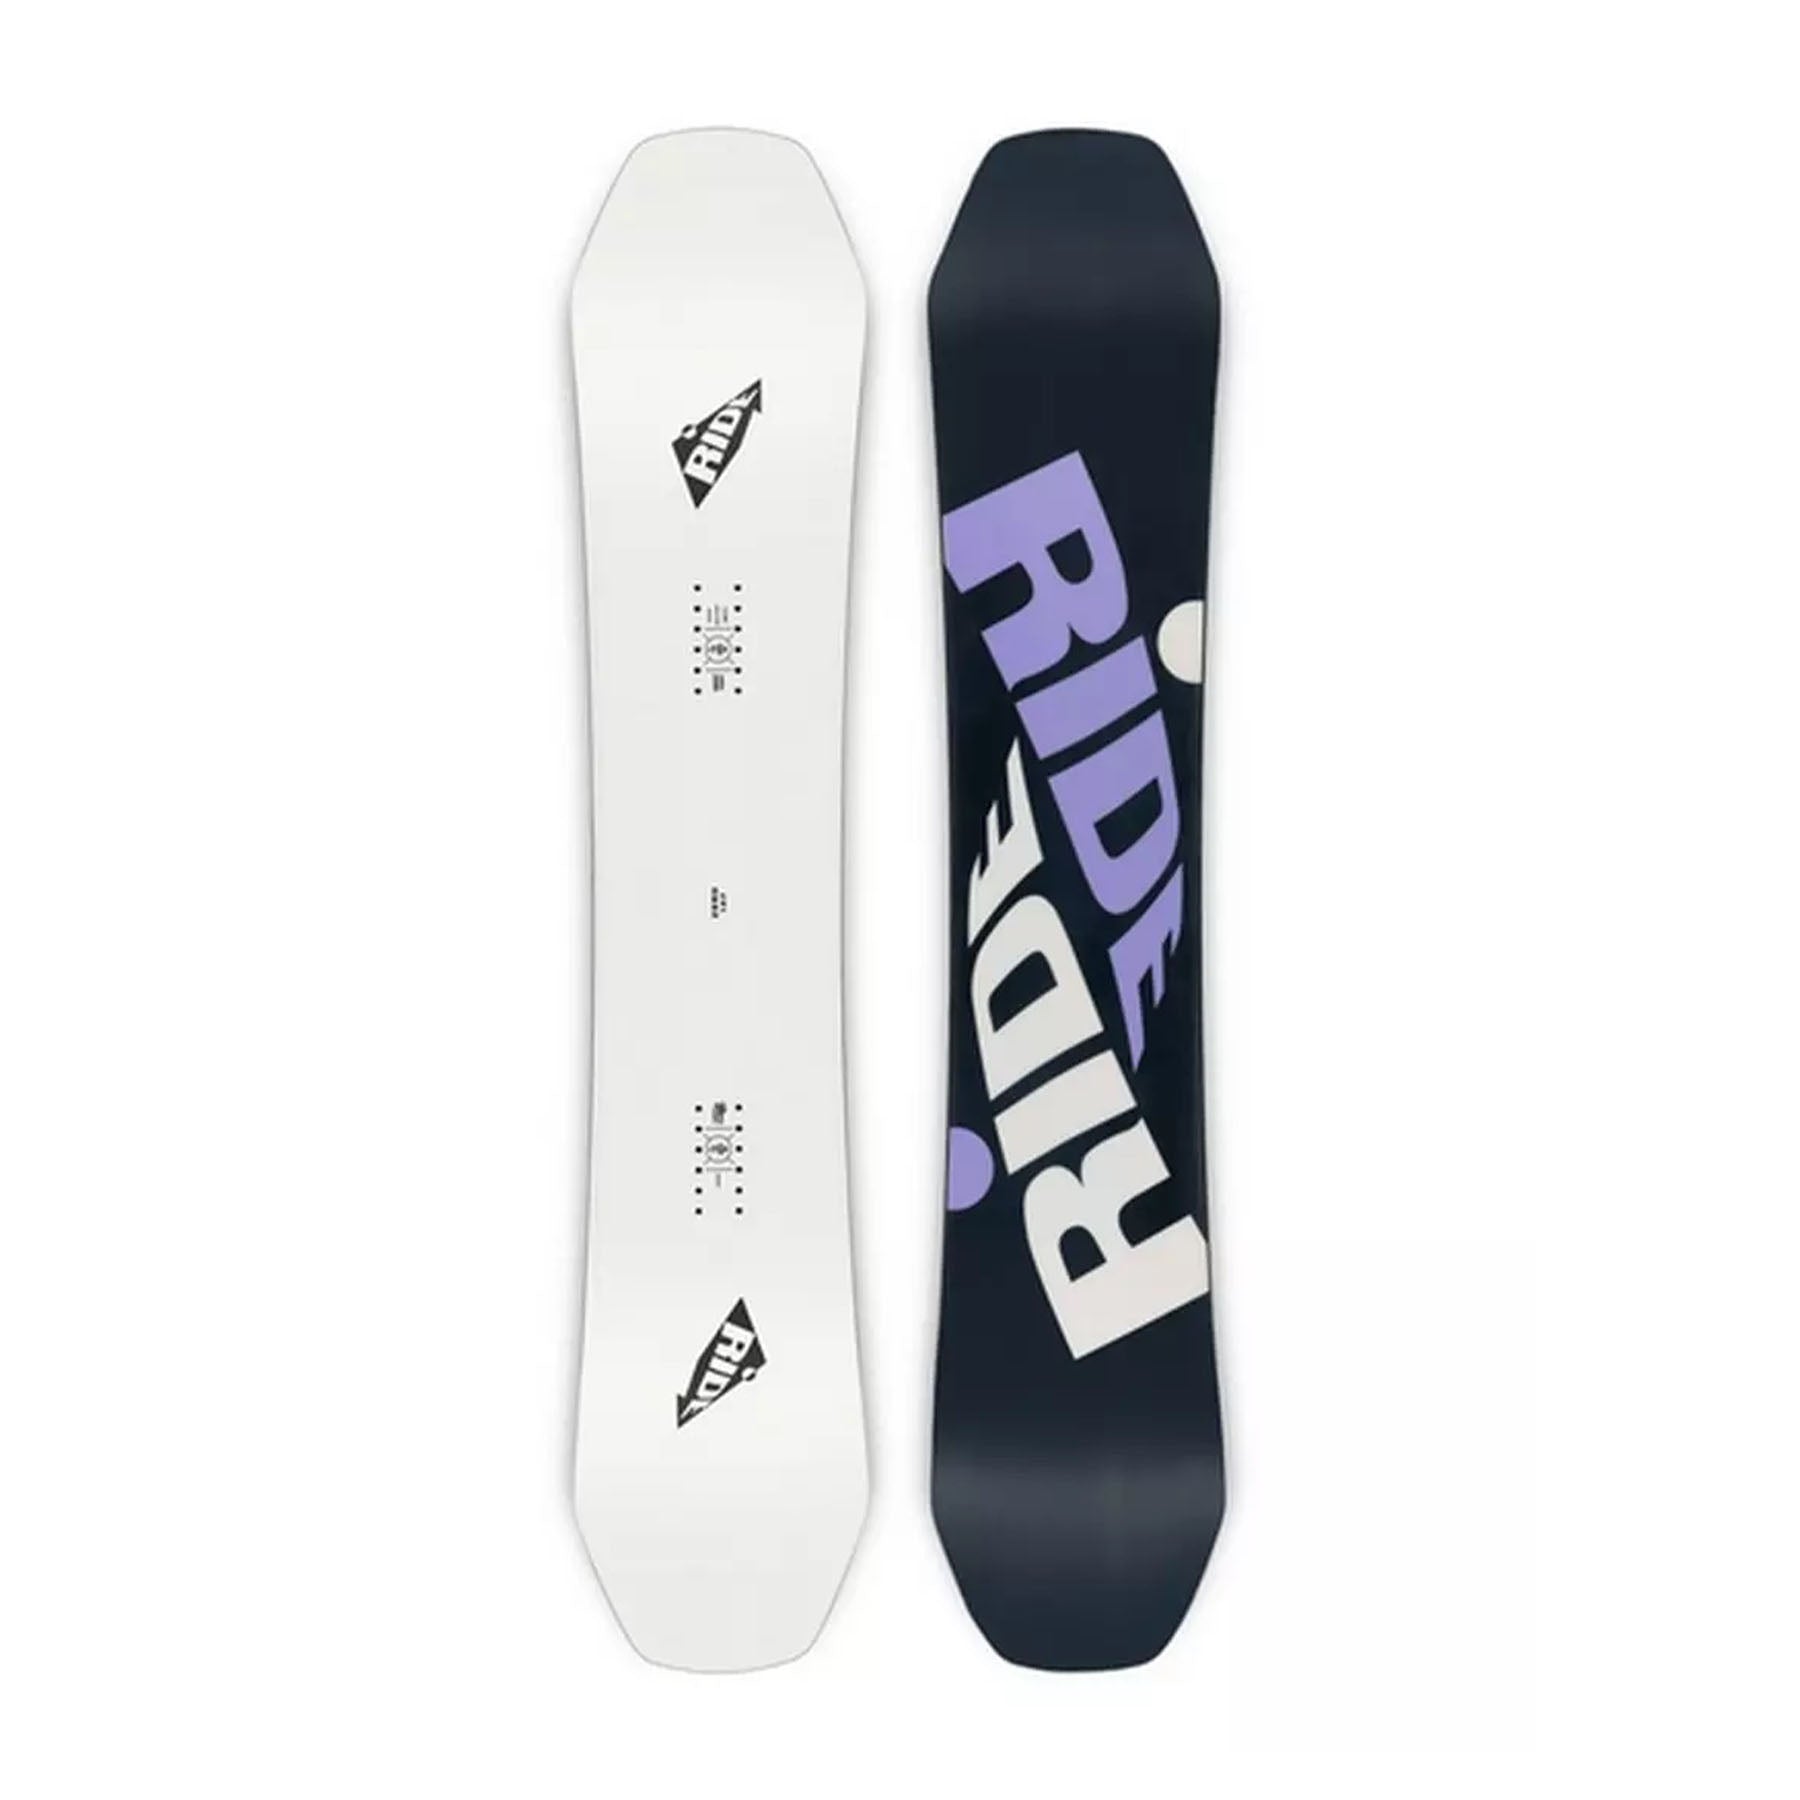 Hero image featuring the top of the Ride Zero snowboard in white with black trim and the bottom of the snowboard in black with white and purple Ride logos.